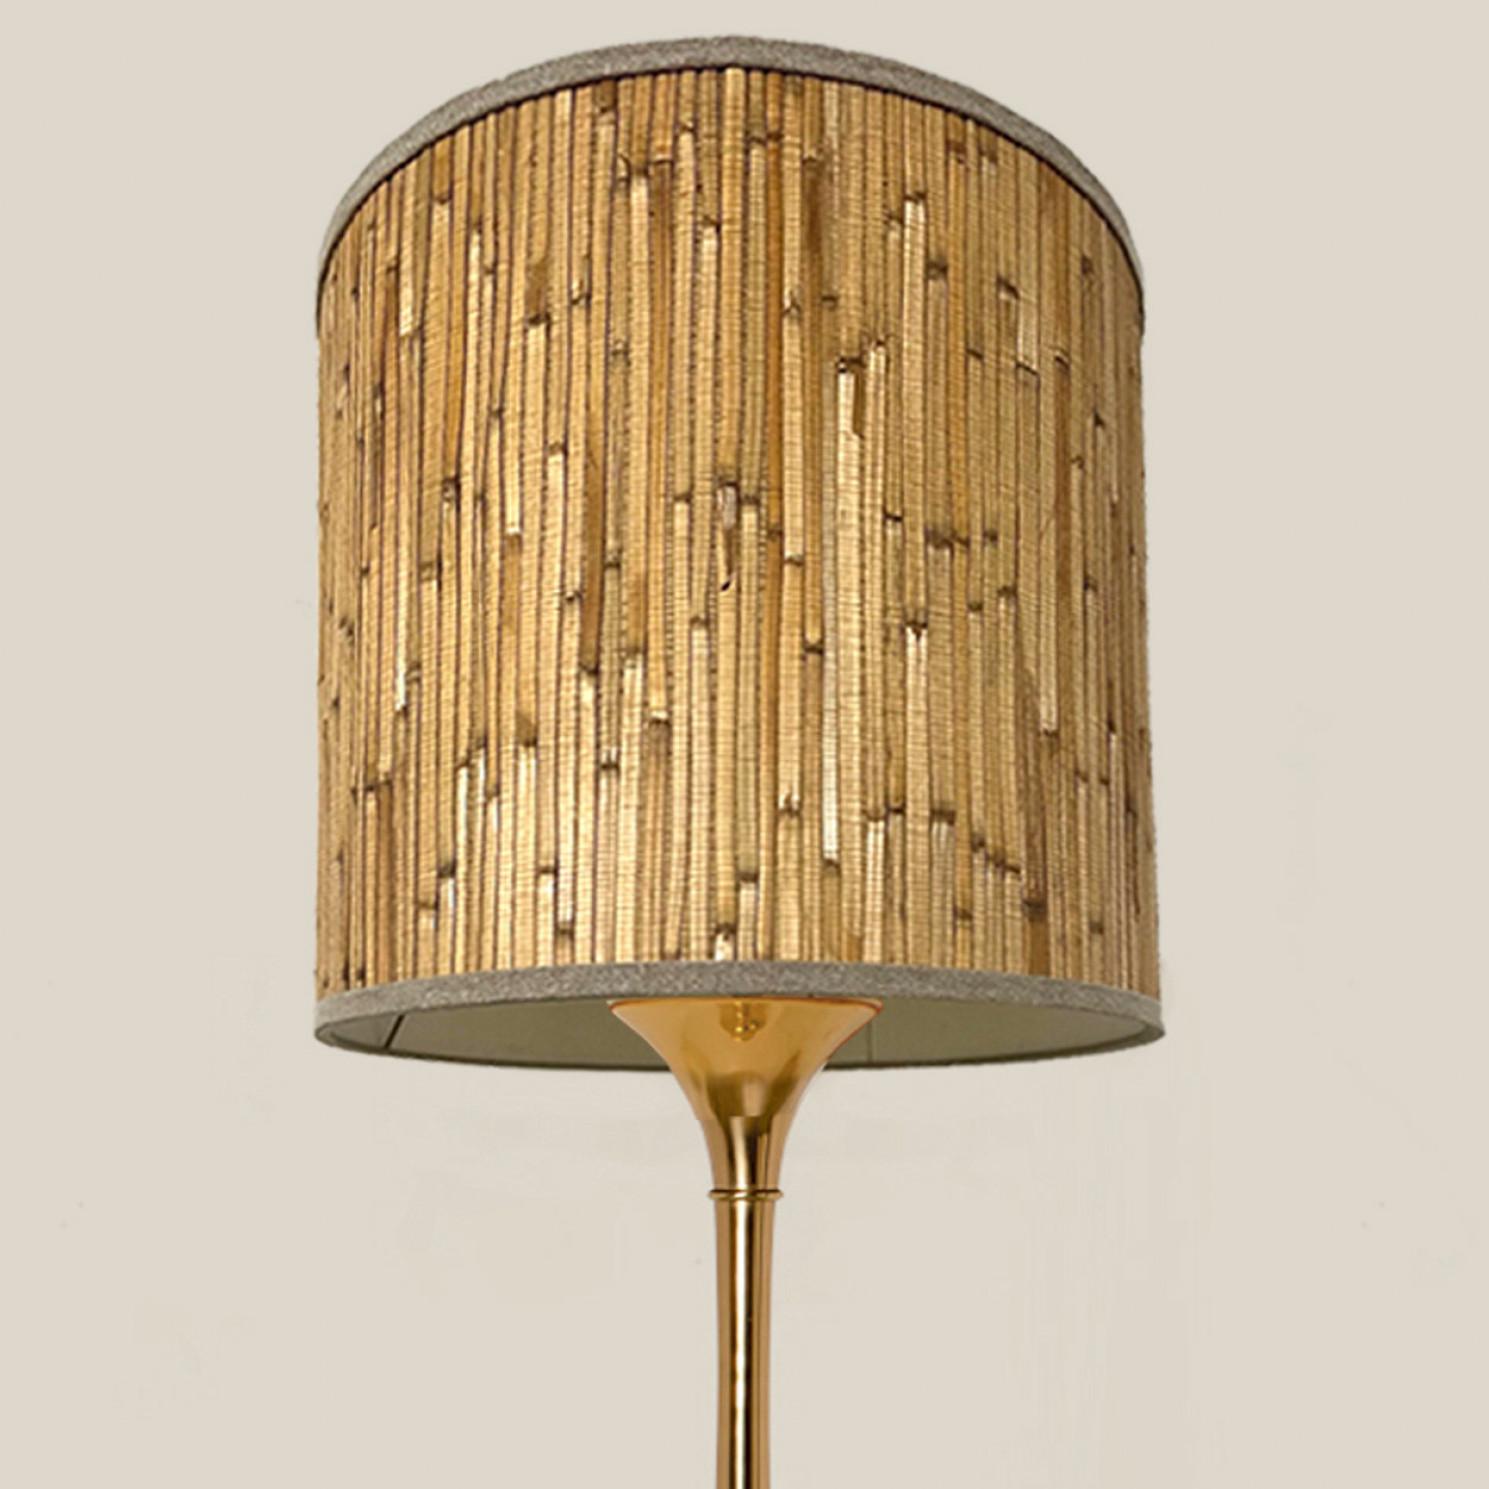 Pair of Elegant gold brass bamboo table lamps Model designed by Ingo Maurer, 1968 for Design M Munich, Germany.
With new bamboo custom made lamp shades with Bronze inner shade. Made by Rene Houben.

Good original vintage condition. Wear consistent